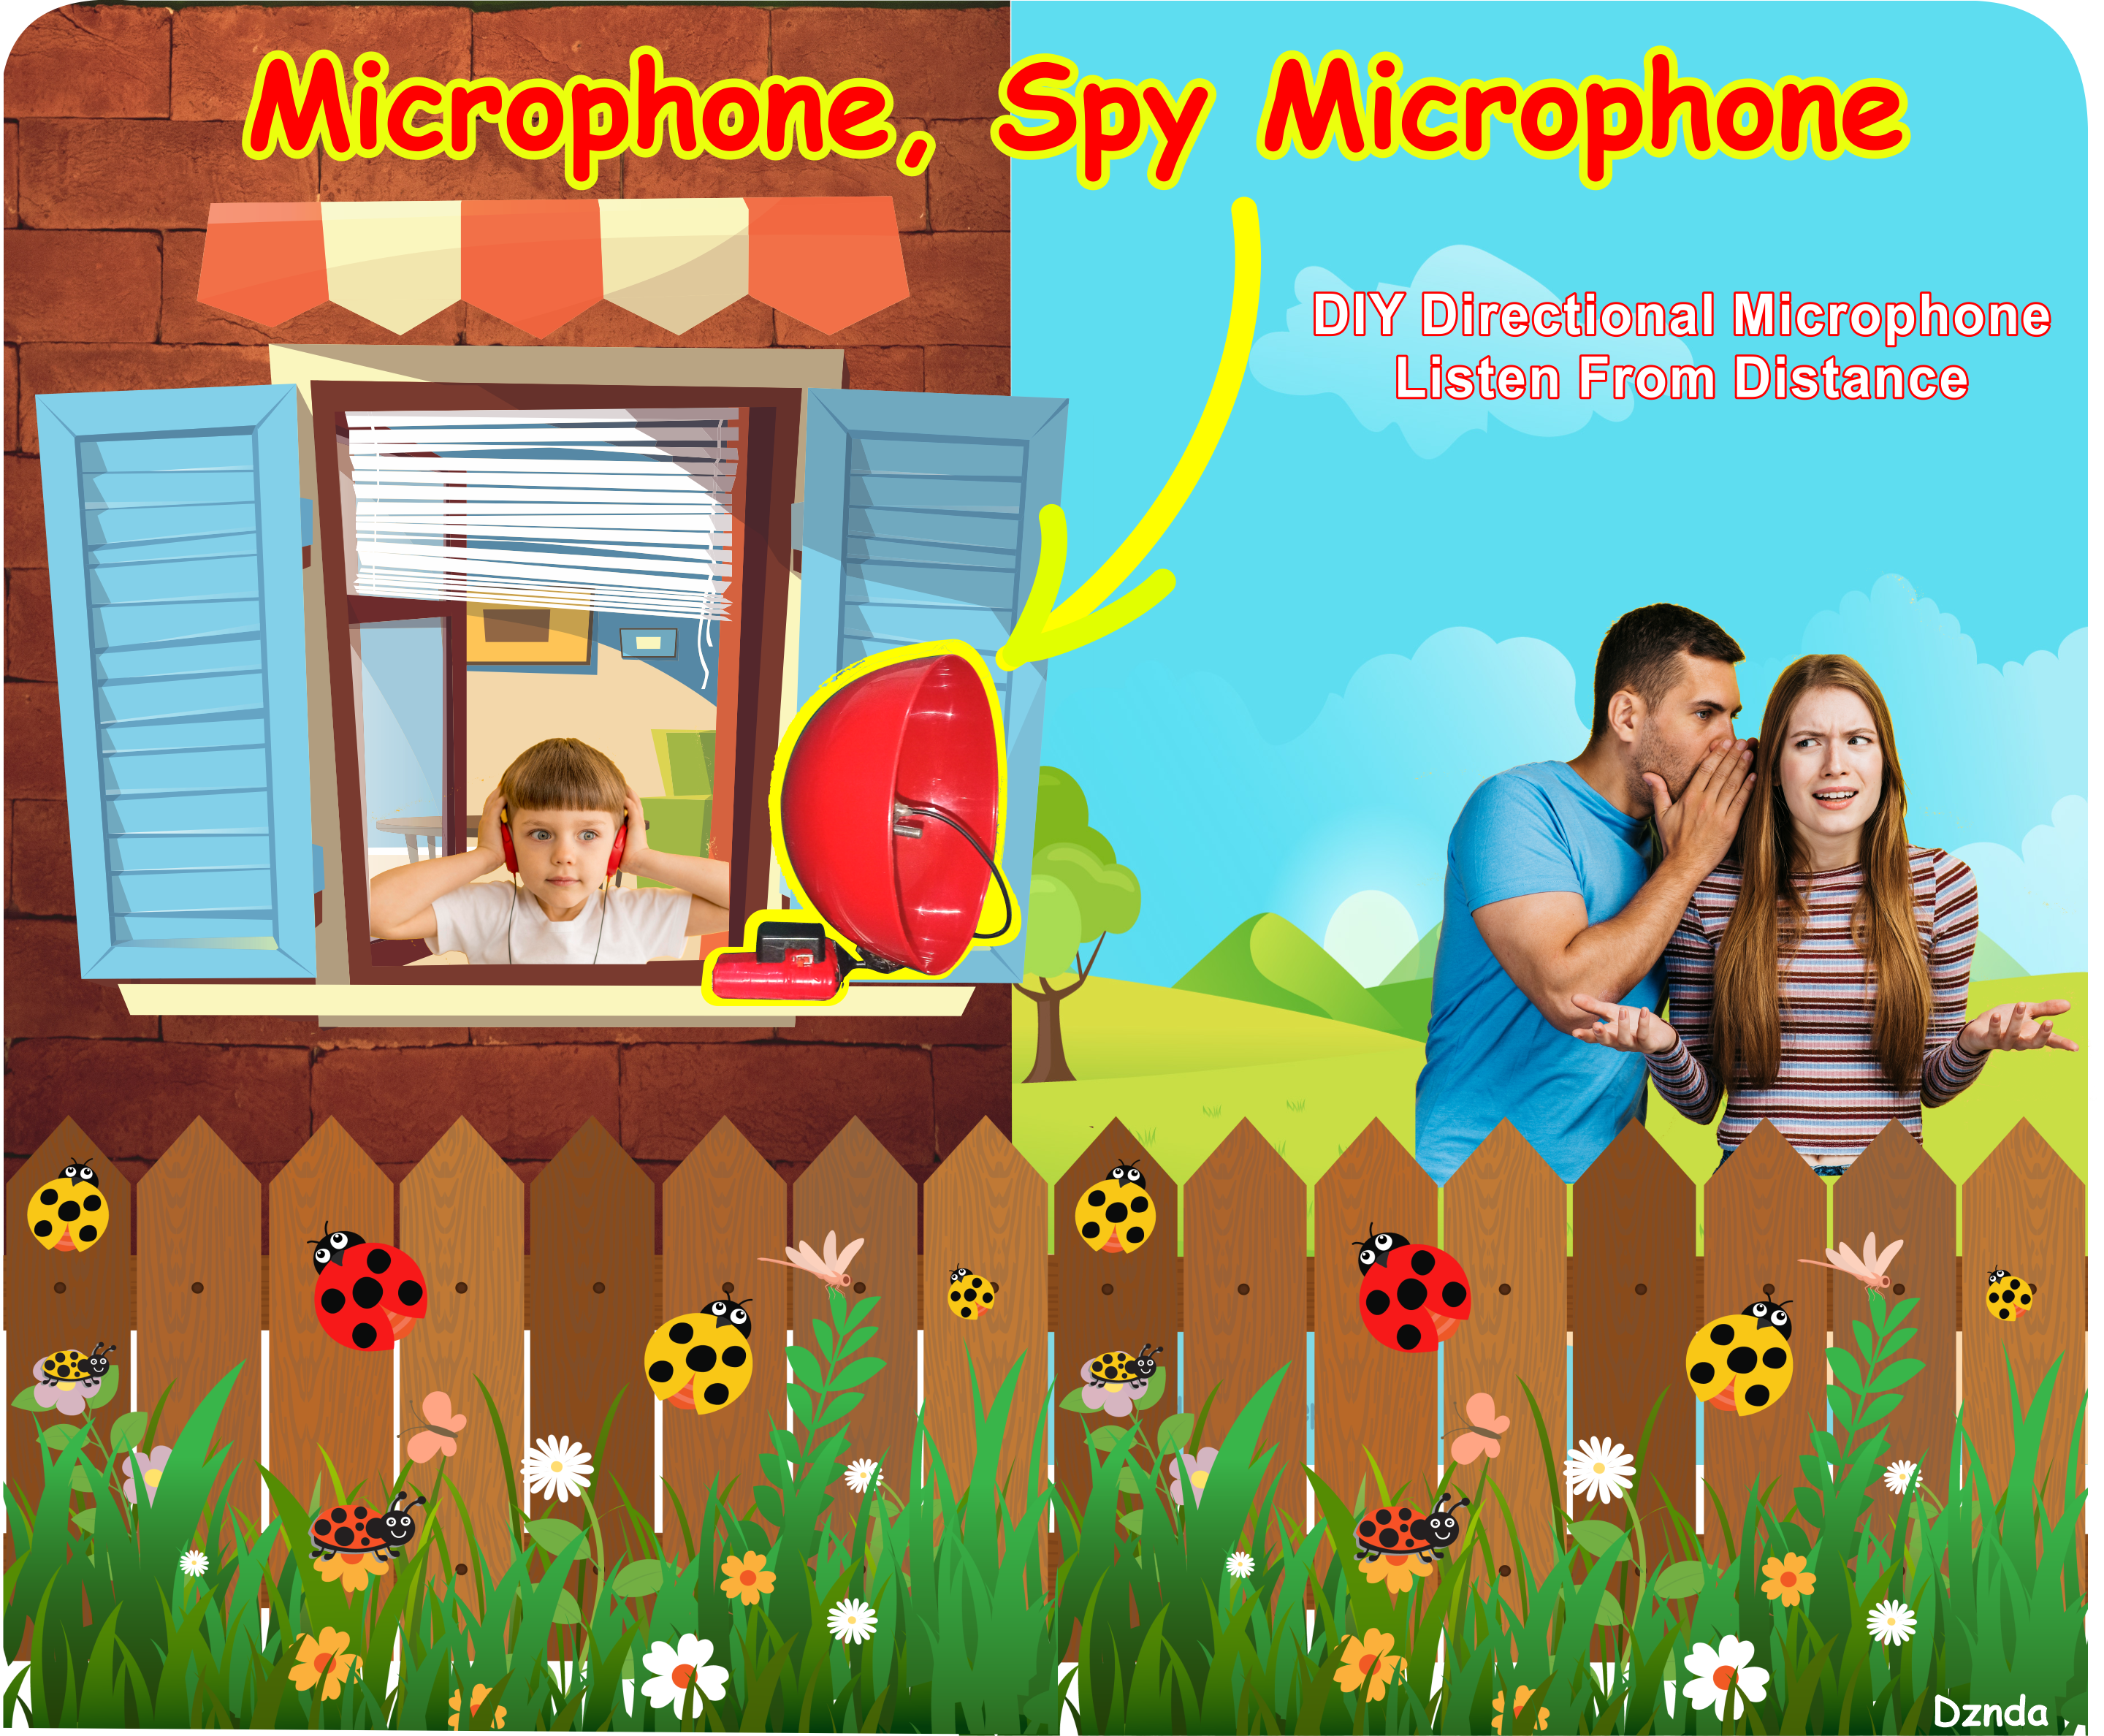 MicrophoneSpyMicrophone Banner 1.png